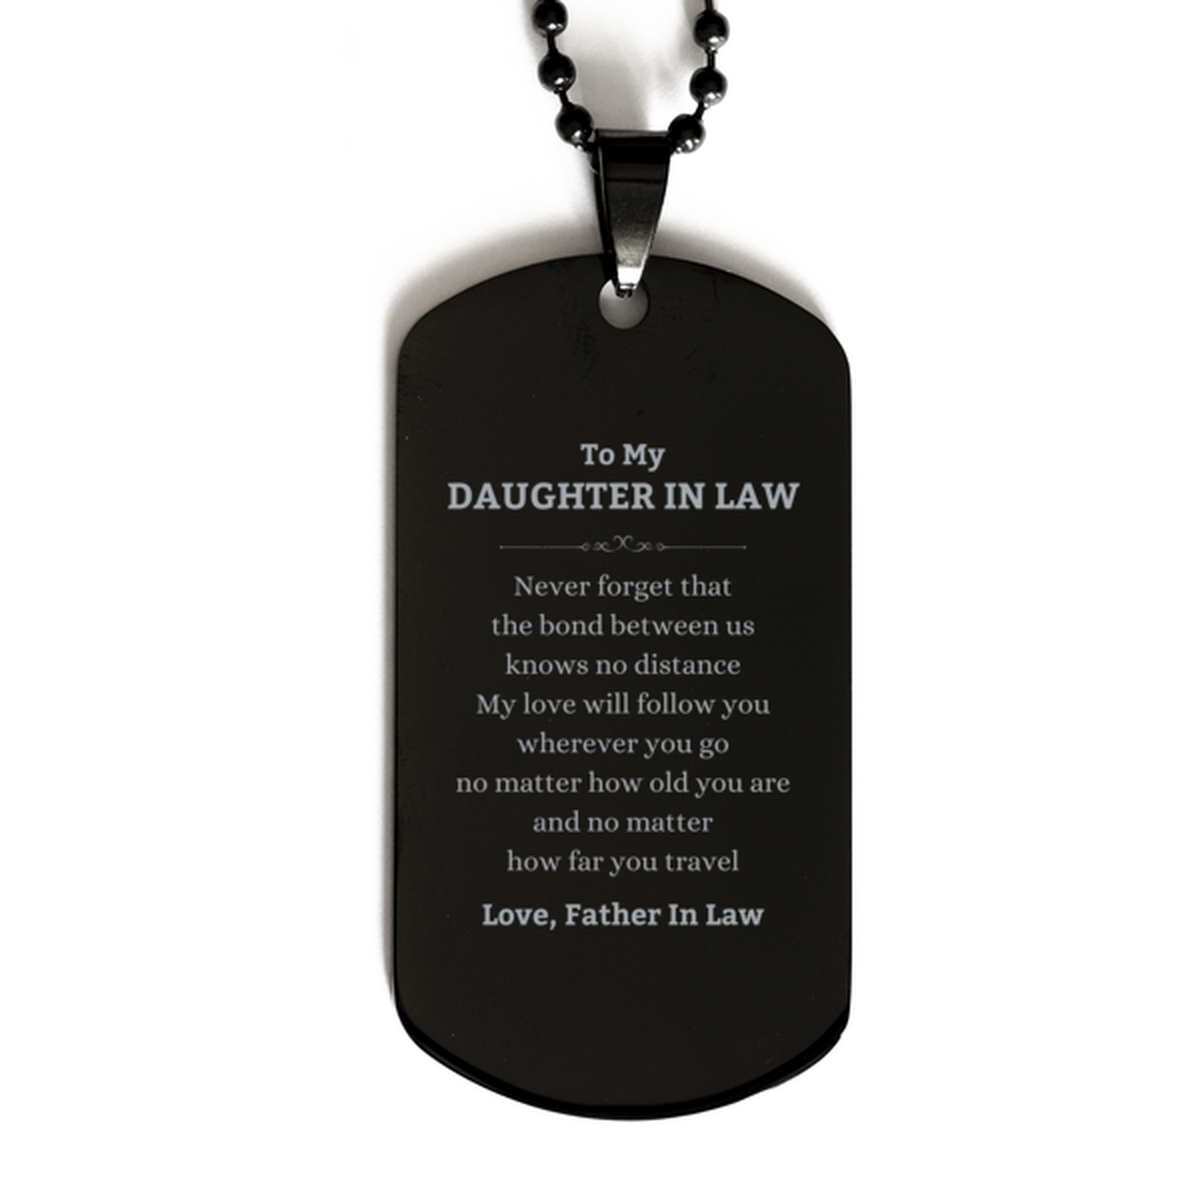 Daughter In Law Birthday Gifts from Father In Law, Adjustable Black Dog Tag for Daughter In Law Christmas Graduation Unique Gifts Daughter In Law Never forget that the bond between us knows no distance. Love, Father In Law